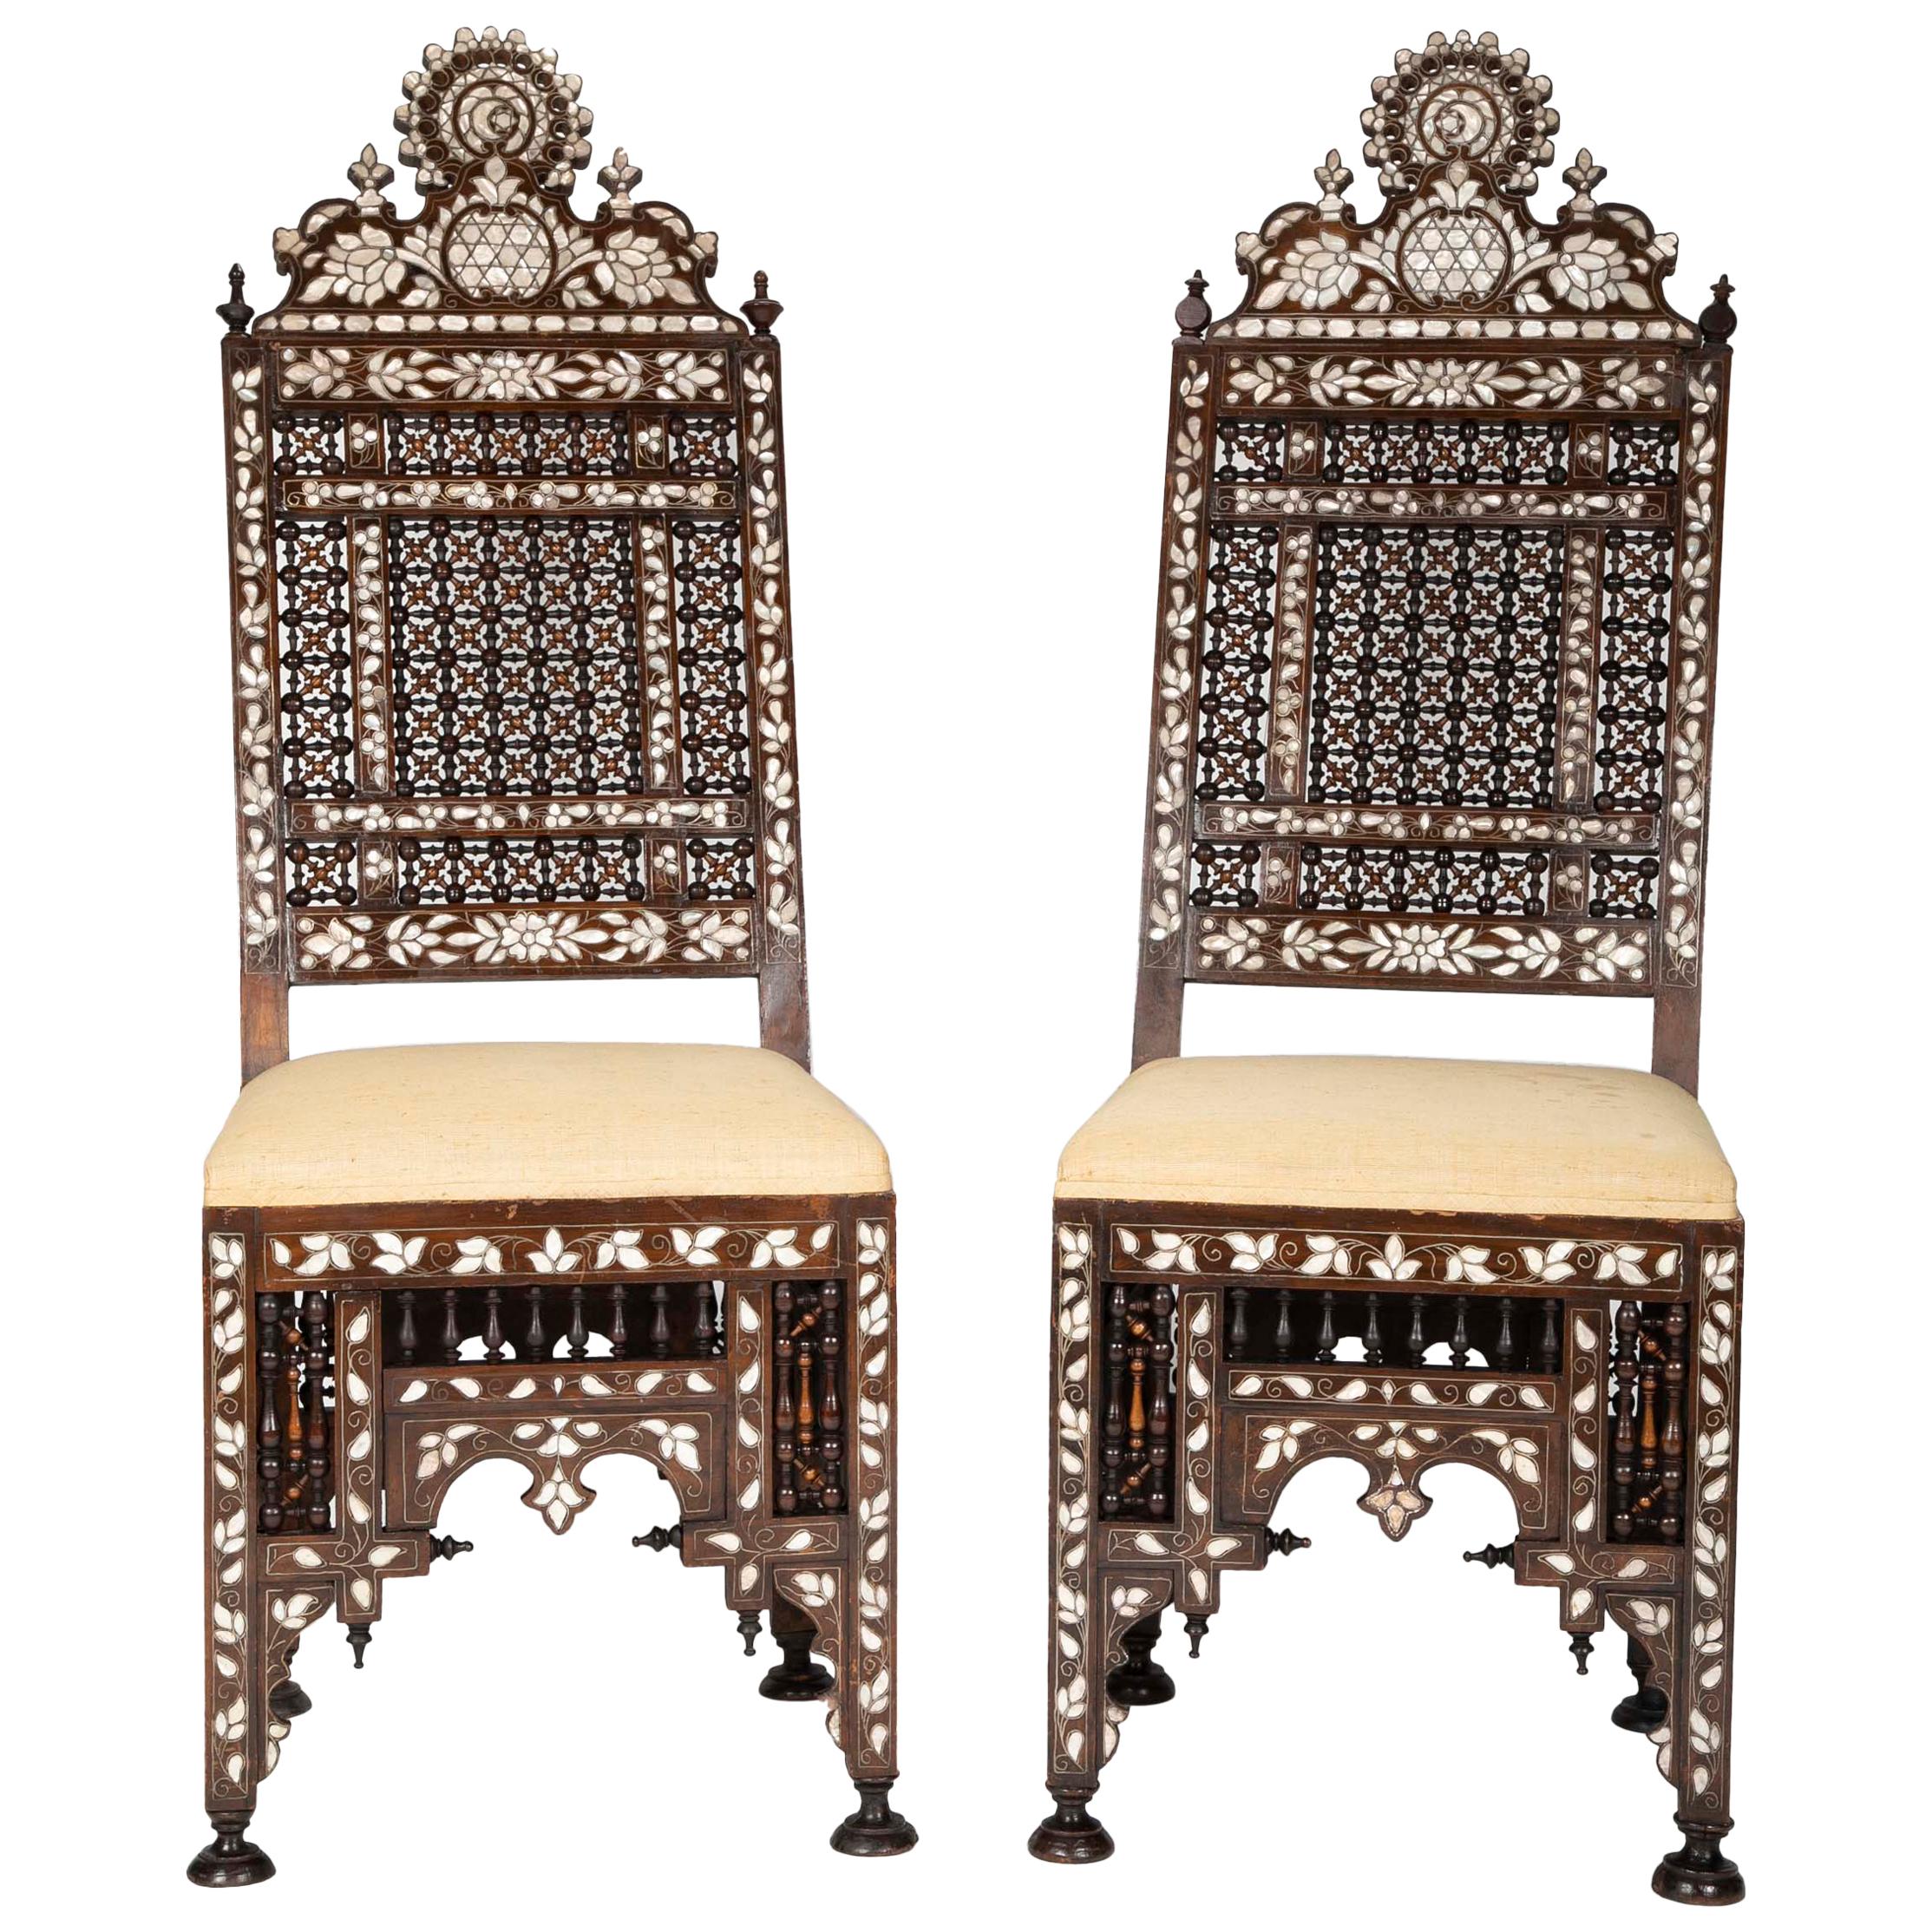 Pair of Ottoman Empire Mother-of-Pearl Inlaid Side Chairs